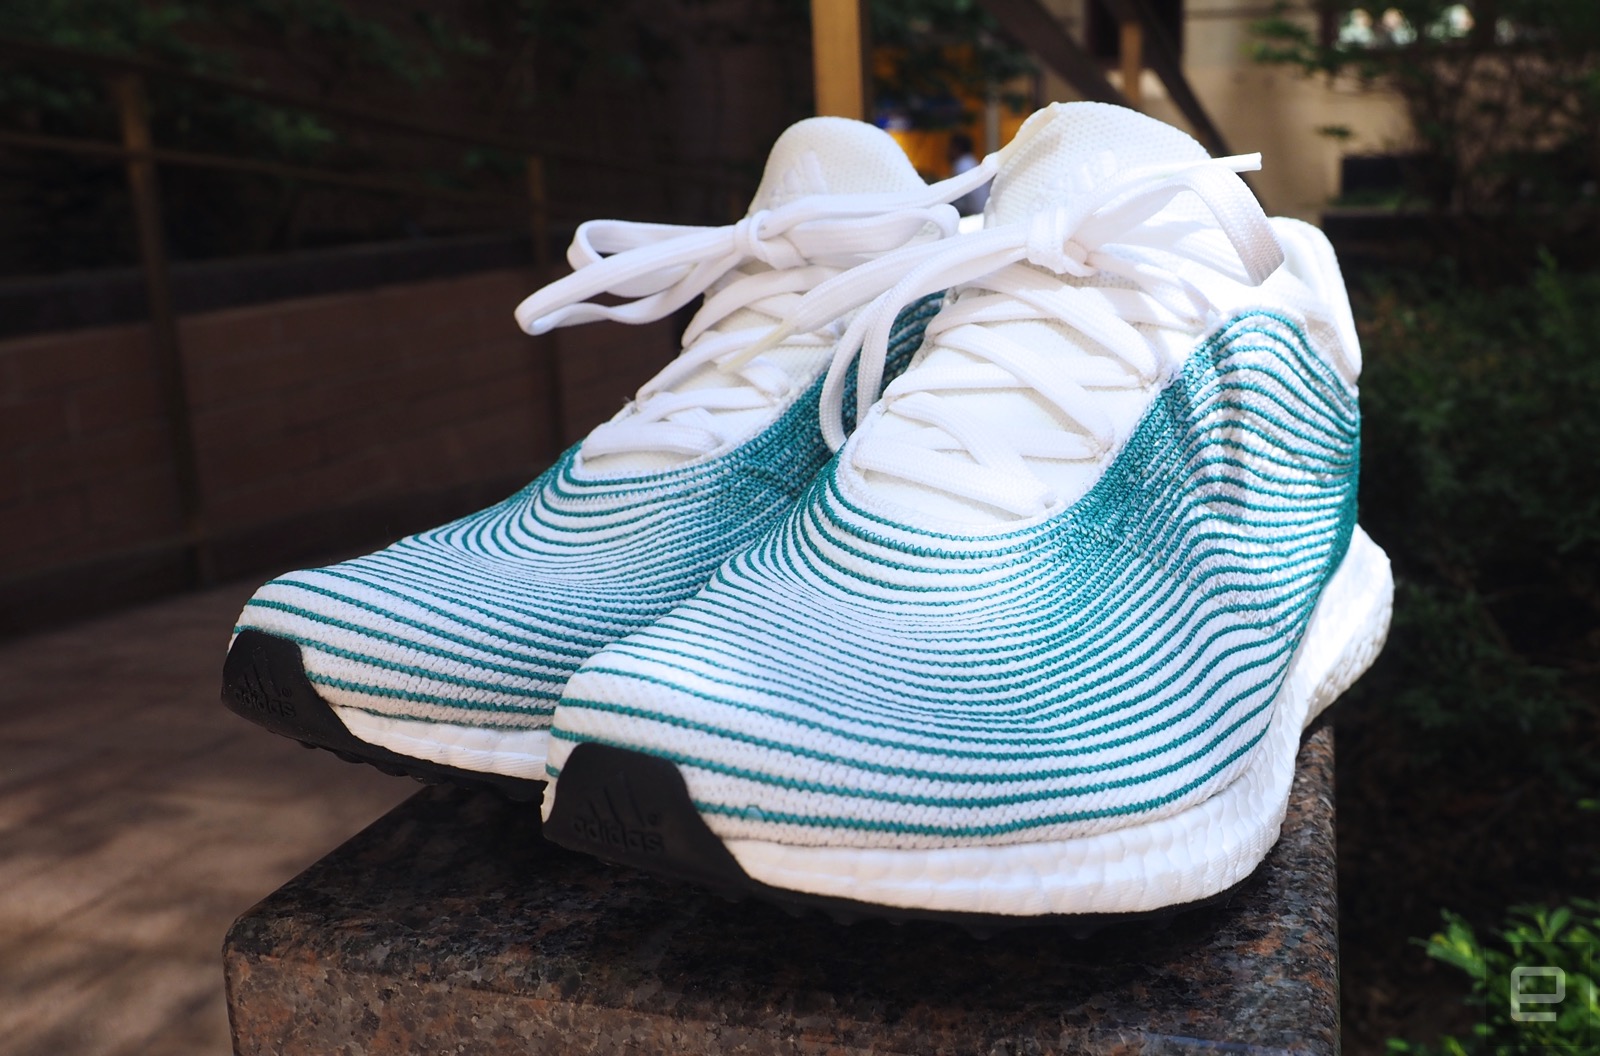 Adidas gets creative shoes made ocean plastic | Engadget